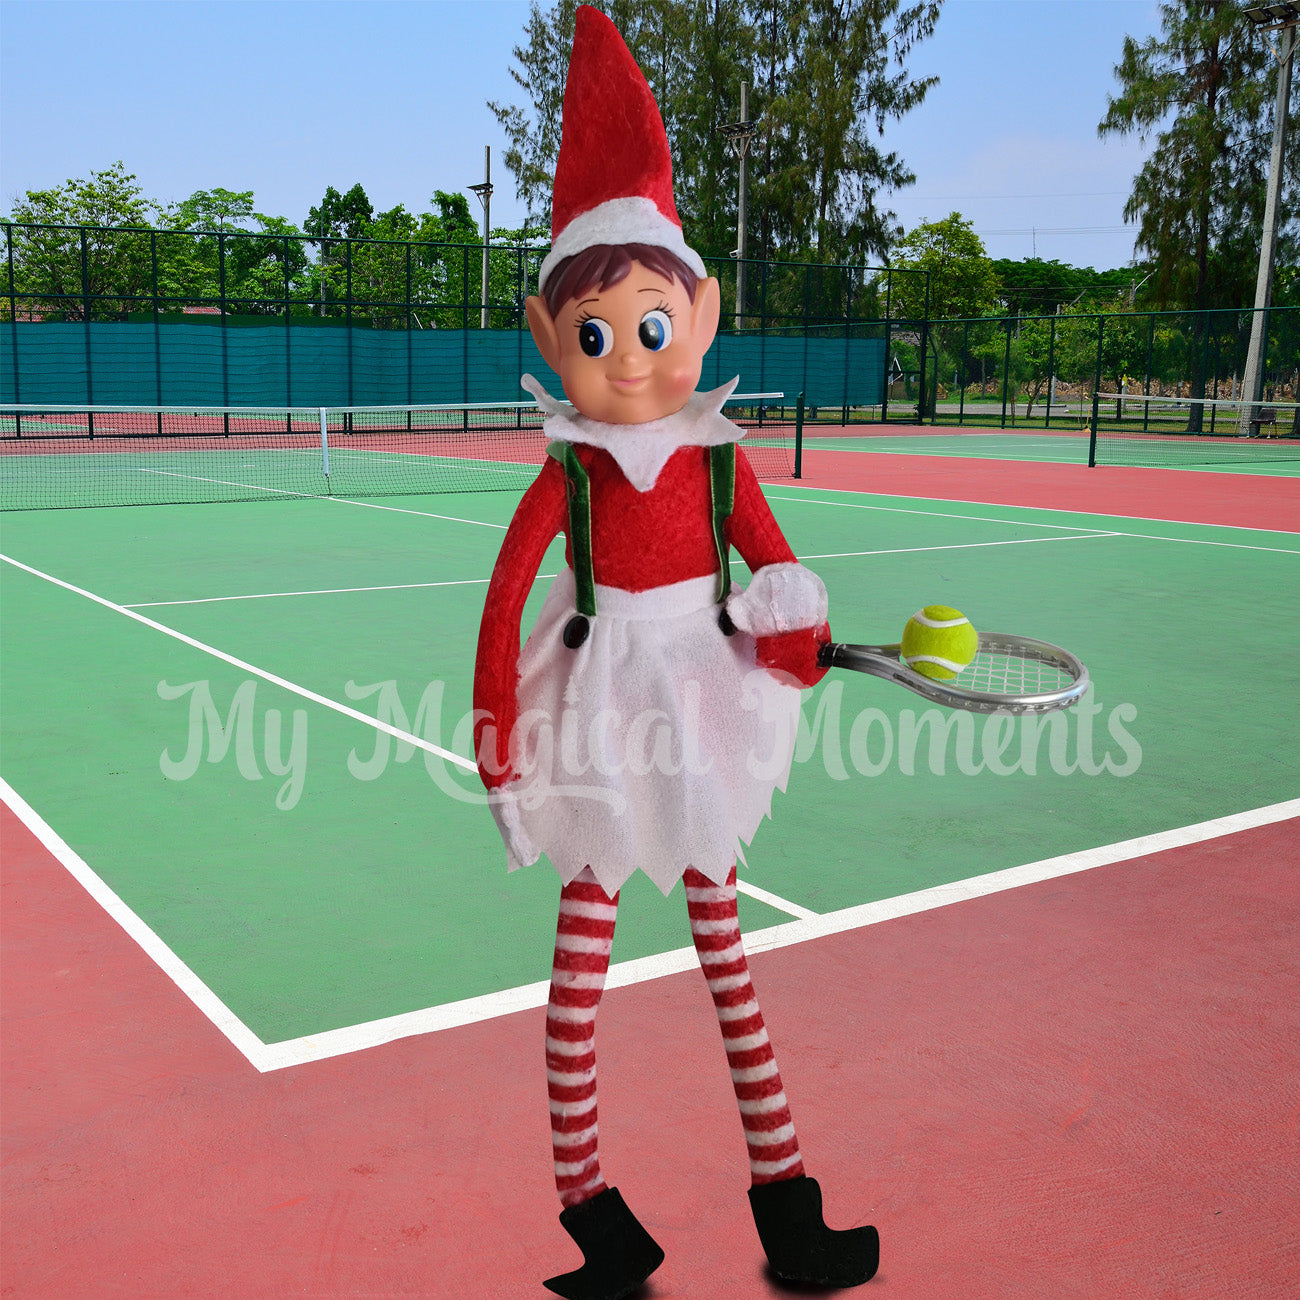 Elves behavin badly in a playsuit playing tennis